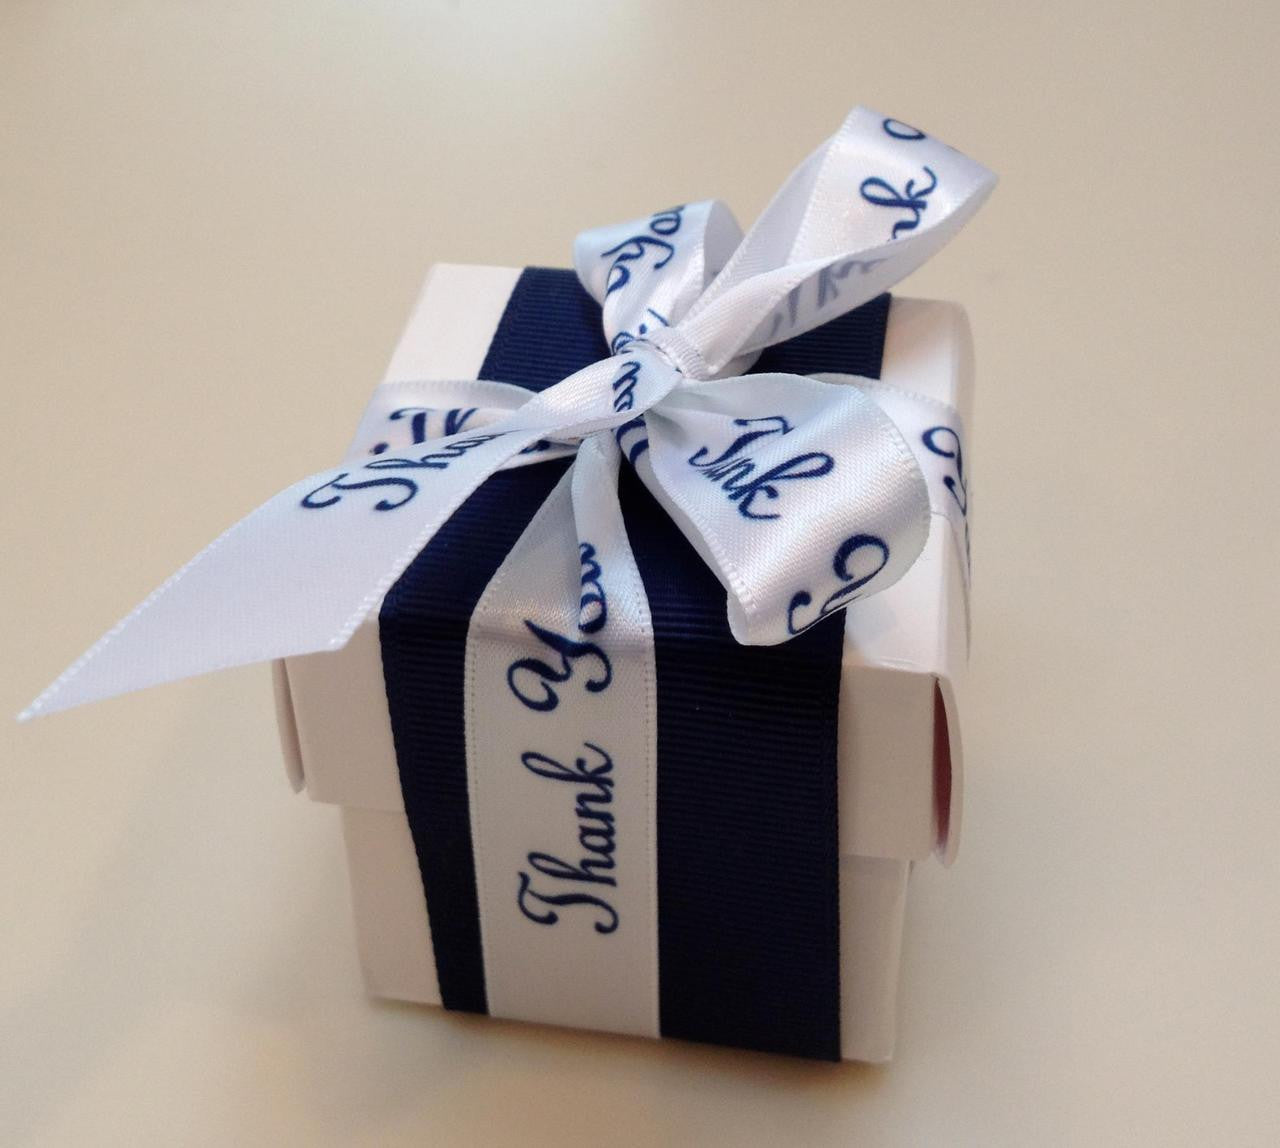 This favor box is dressed up formally! A band of navy grosgrain ribbon is adorned with our navy and white satin Thank You ribbon. Perfect for an elegant statement at the end of a beautiful evening!